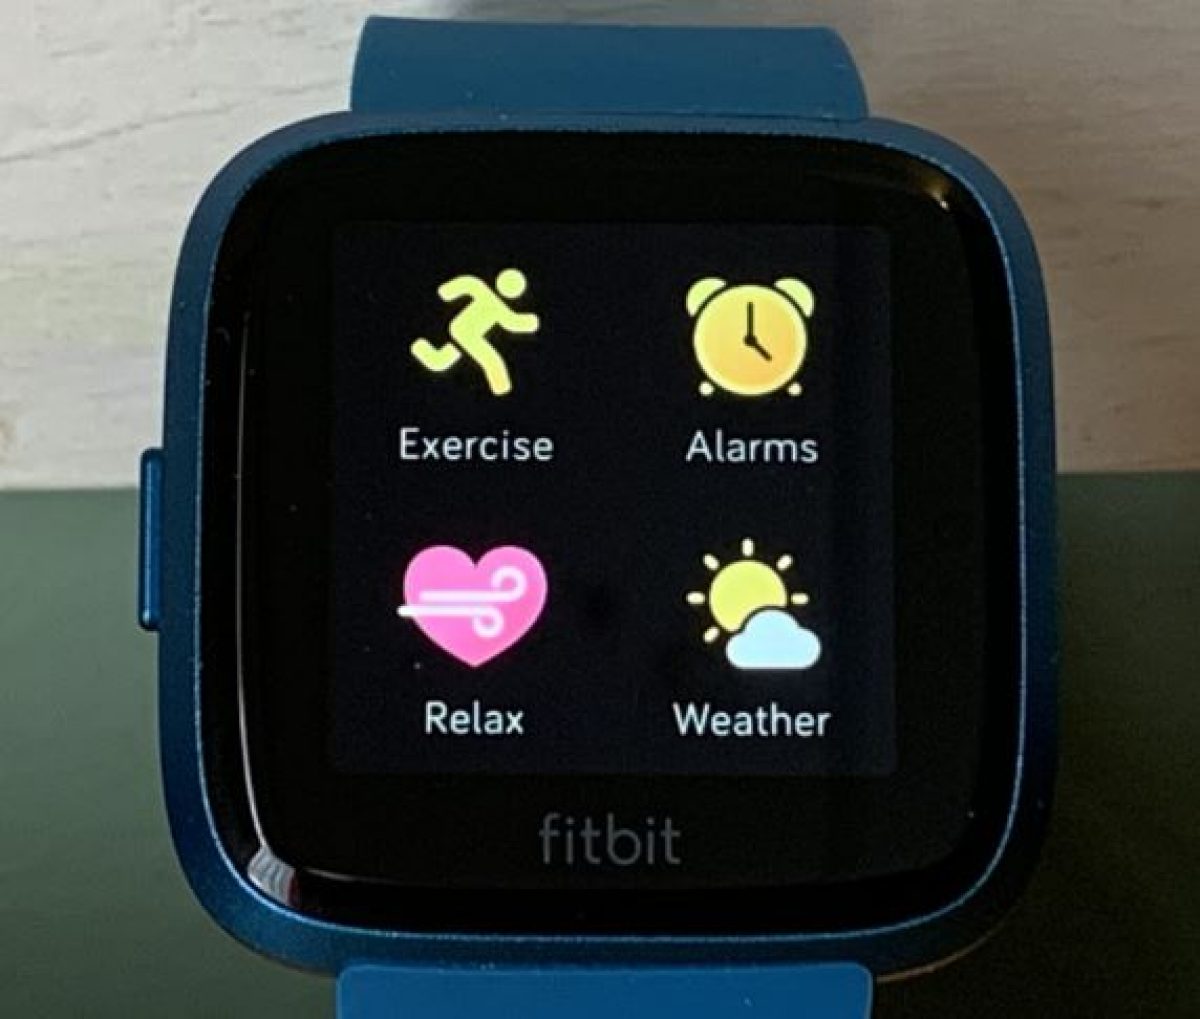 how do i reset the time on my versa fitbit